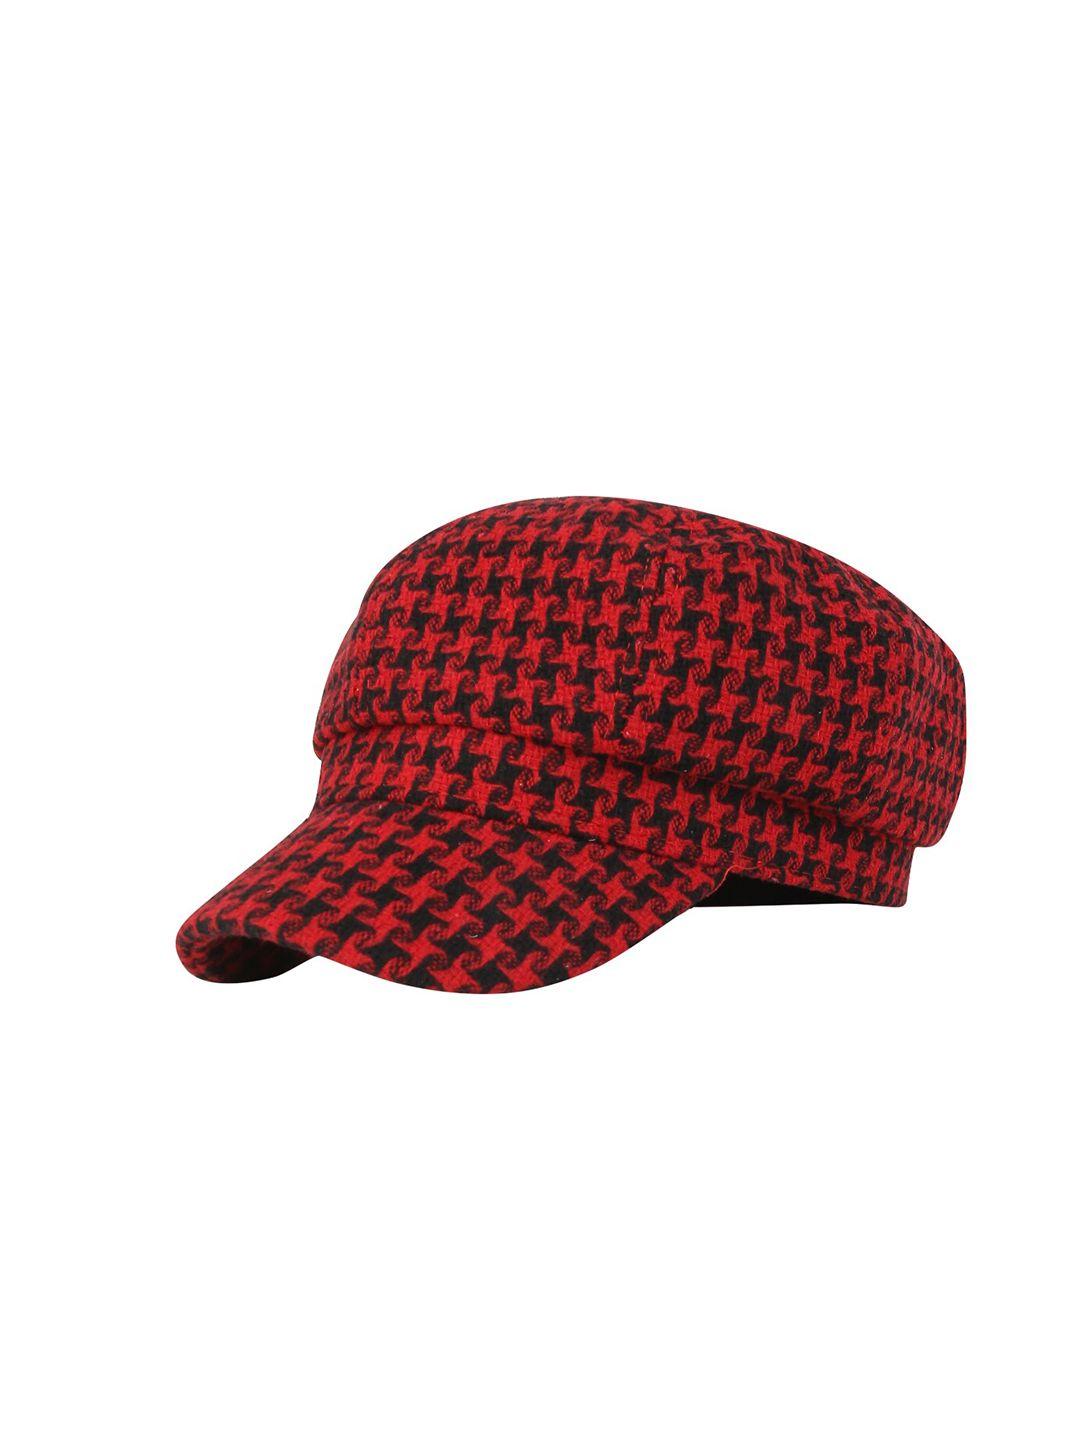 isweven unisex red & black printed cotton ascot cap